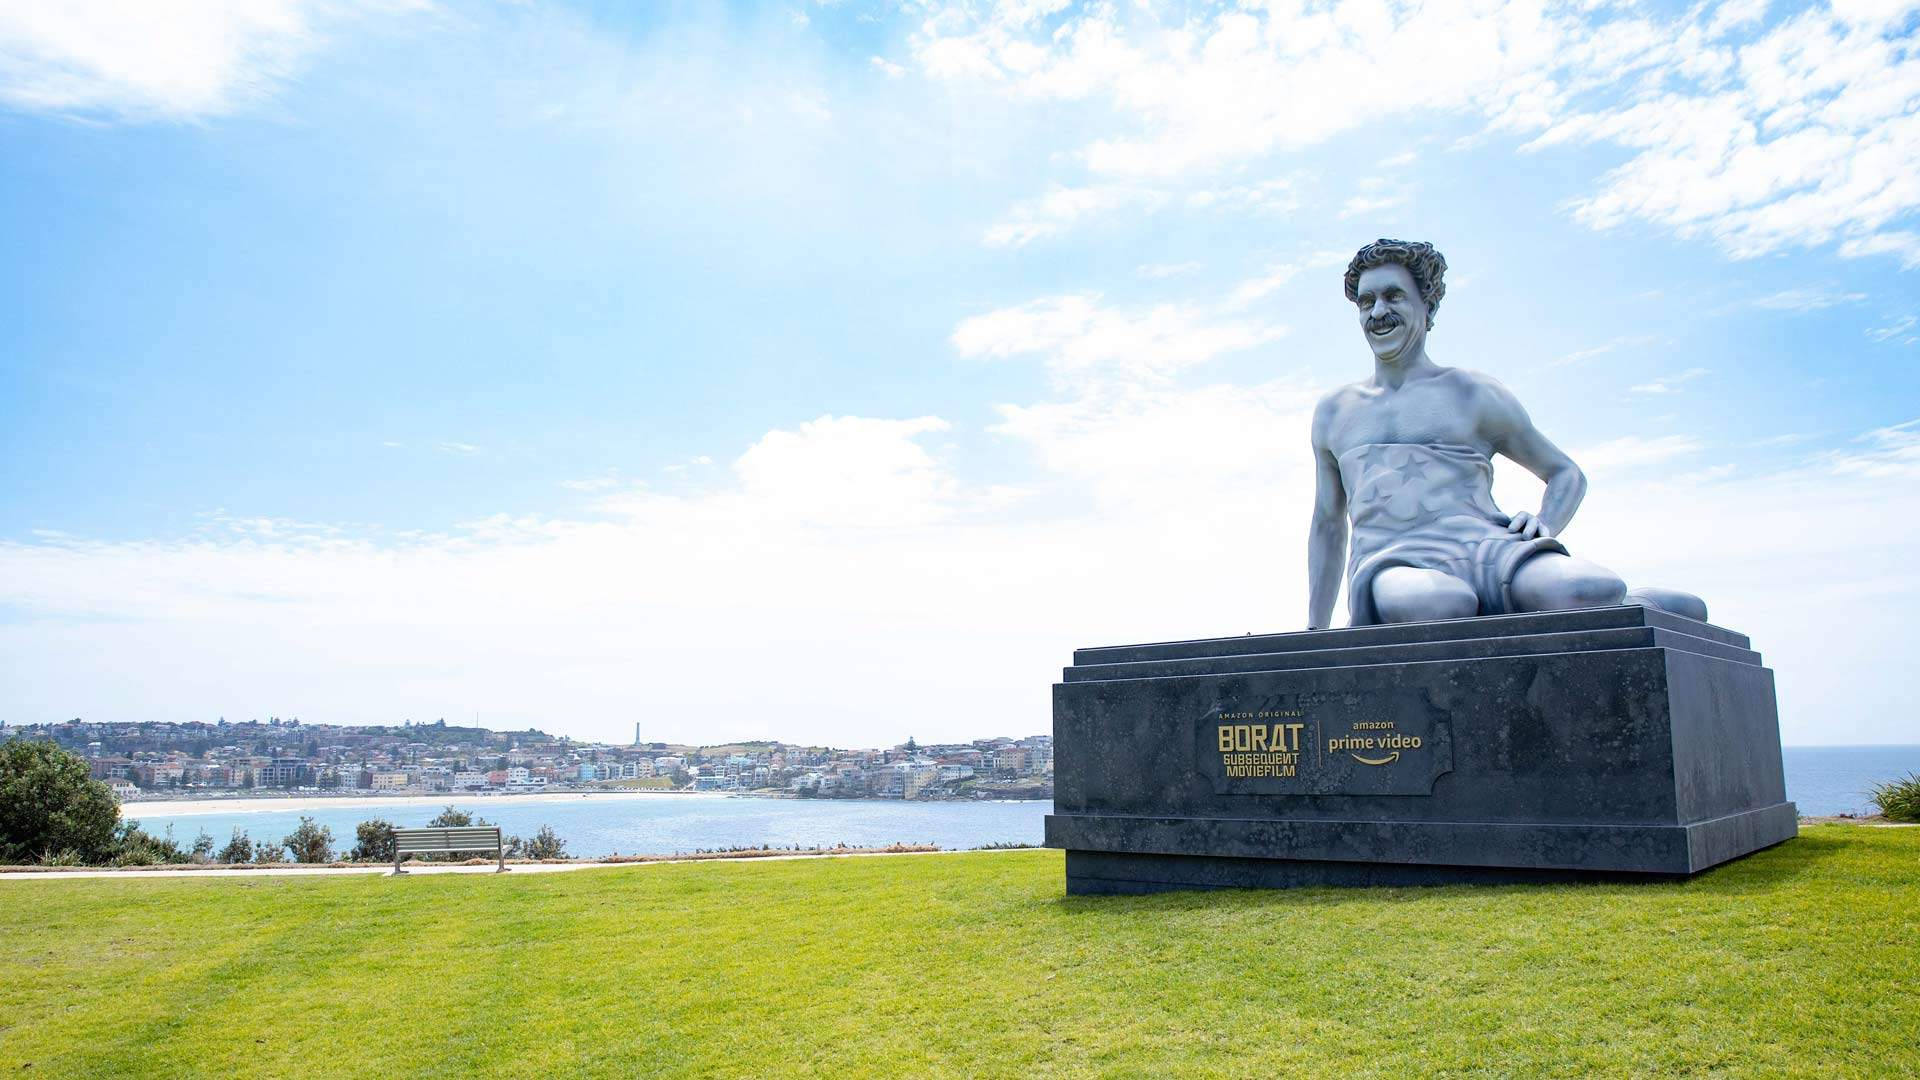 A Very Nice Statue of Borat Has Popped Up at Bondi Beach for 24 Hours